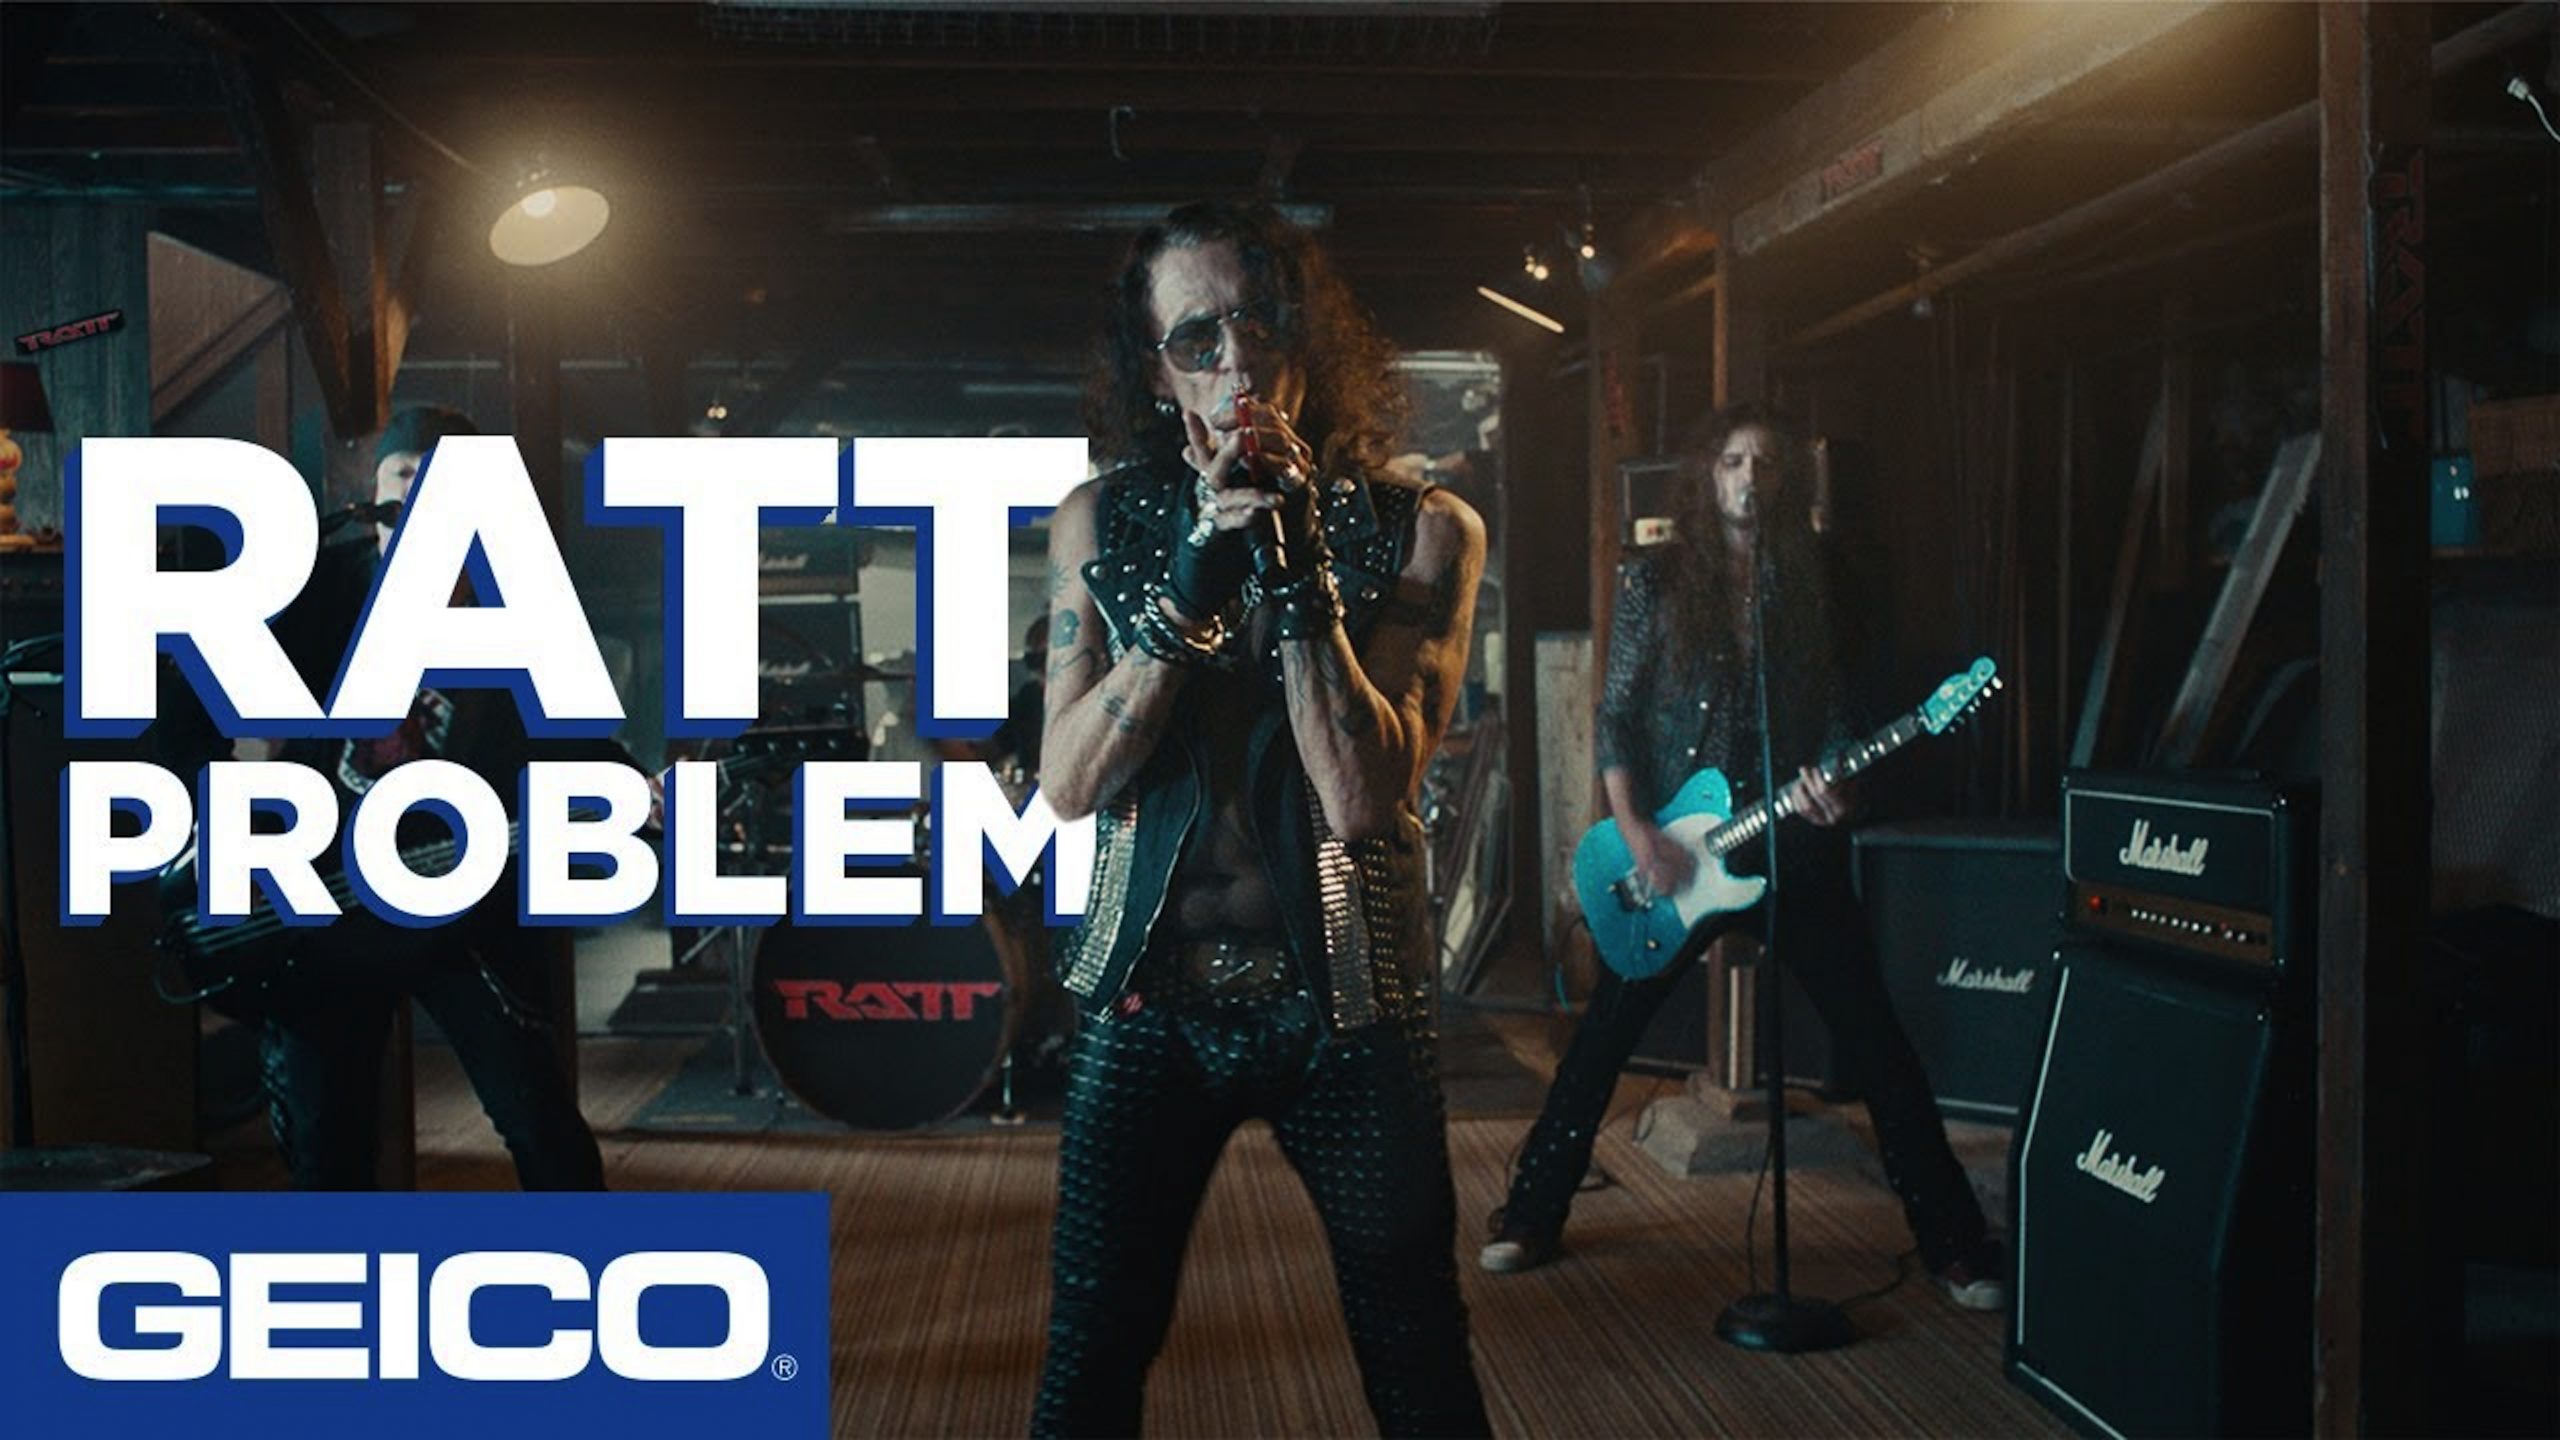 Ratt Infests The Billboard Charts Again Thanks To New Geico Commercial